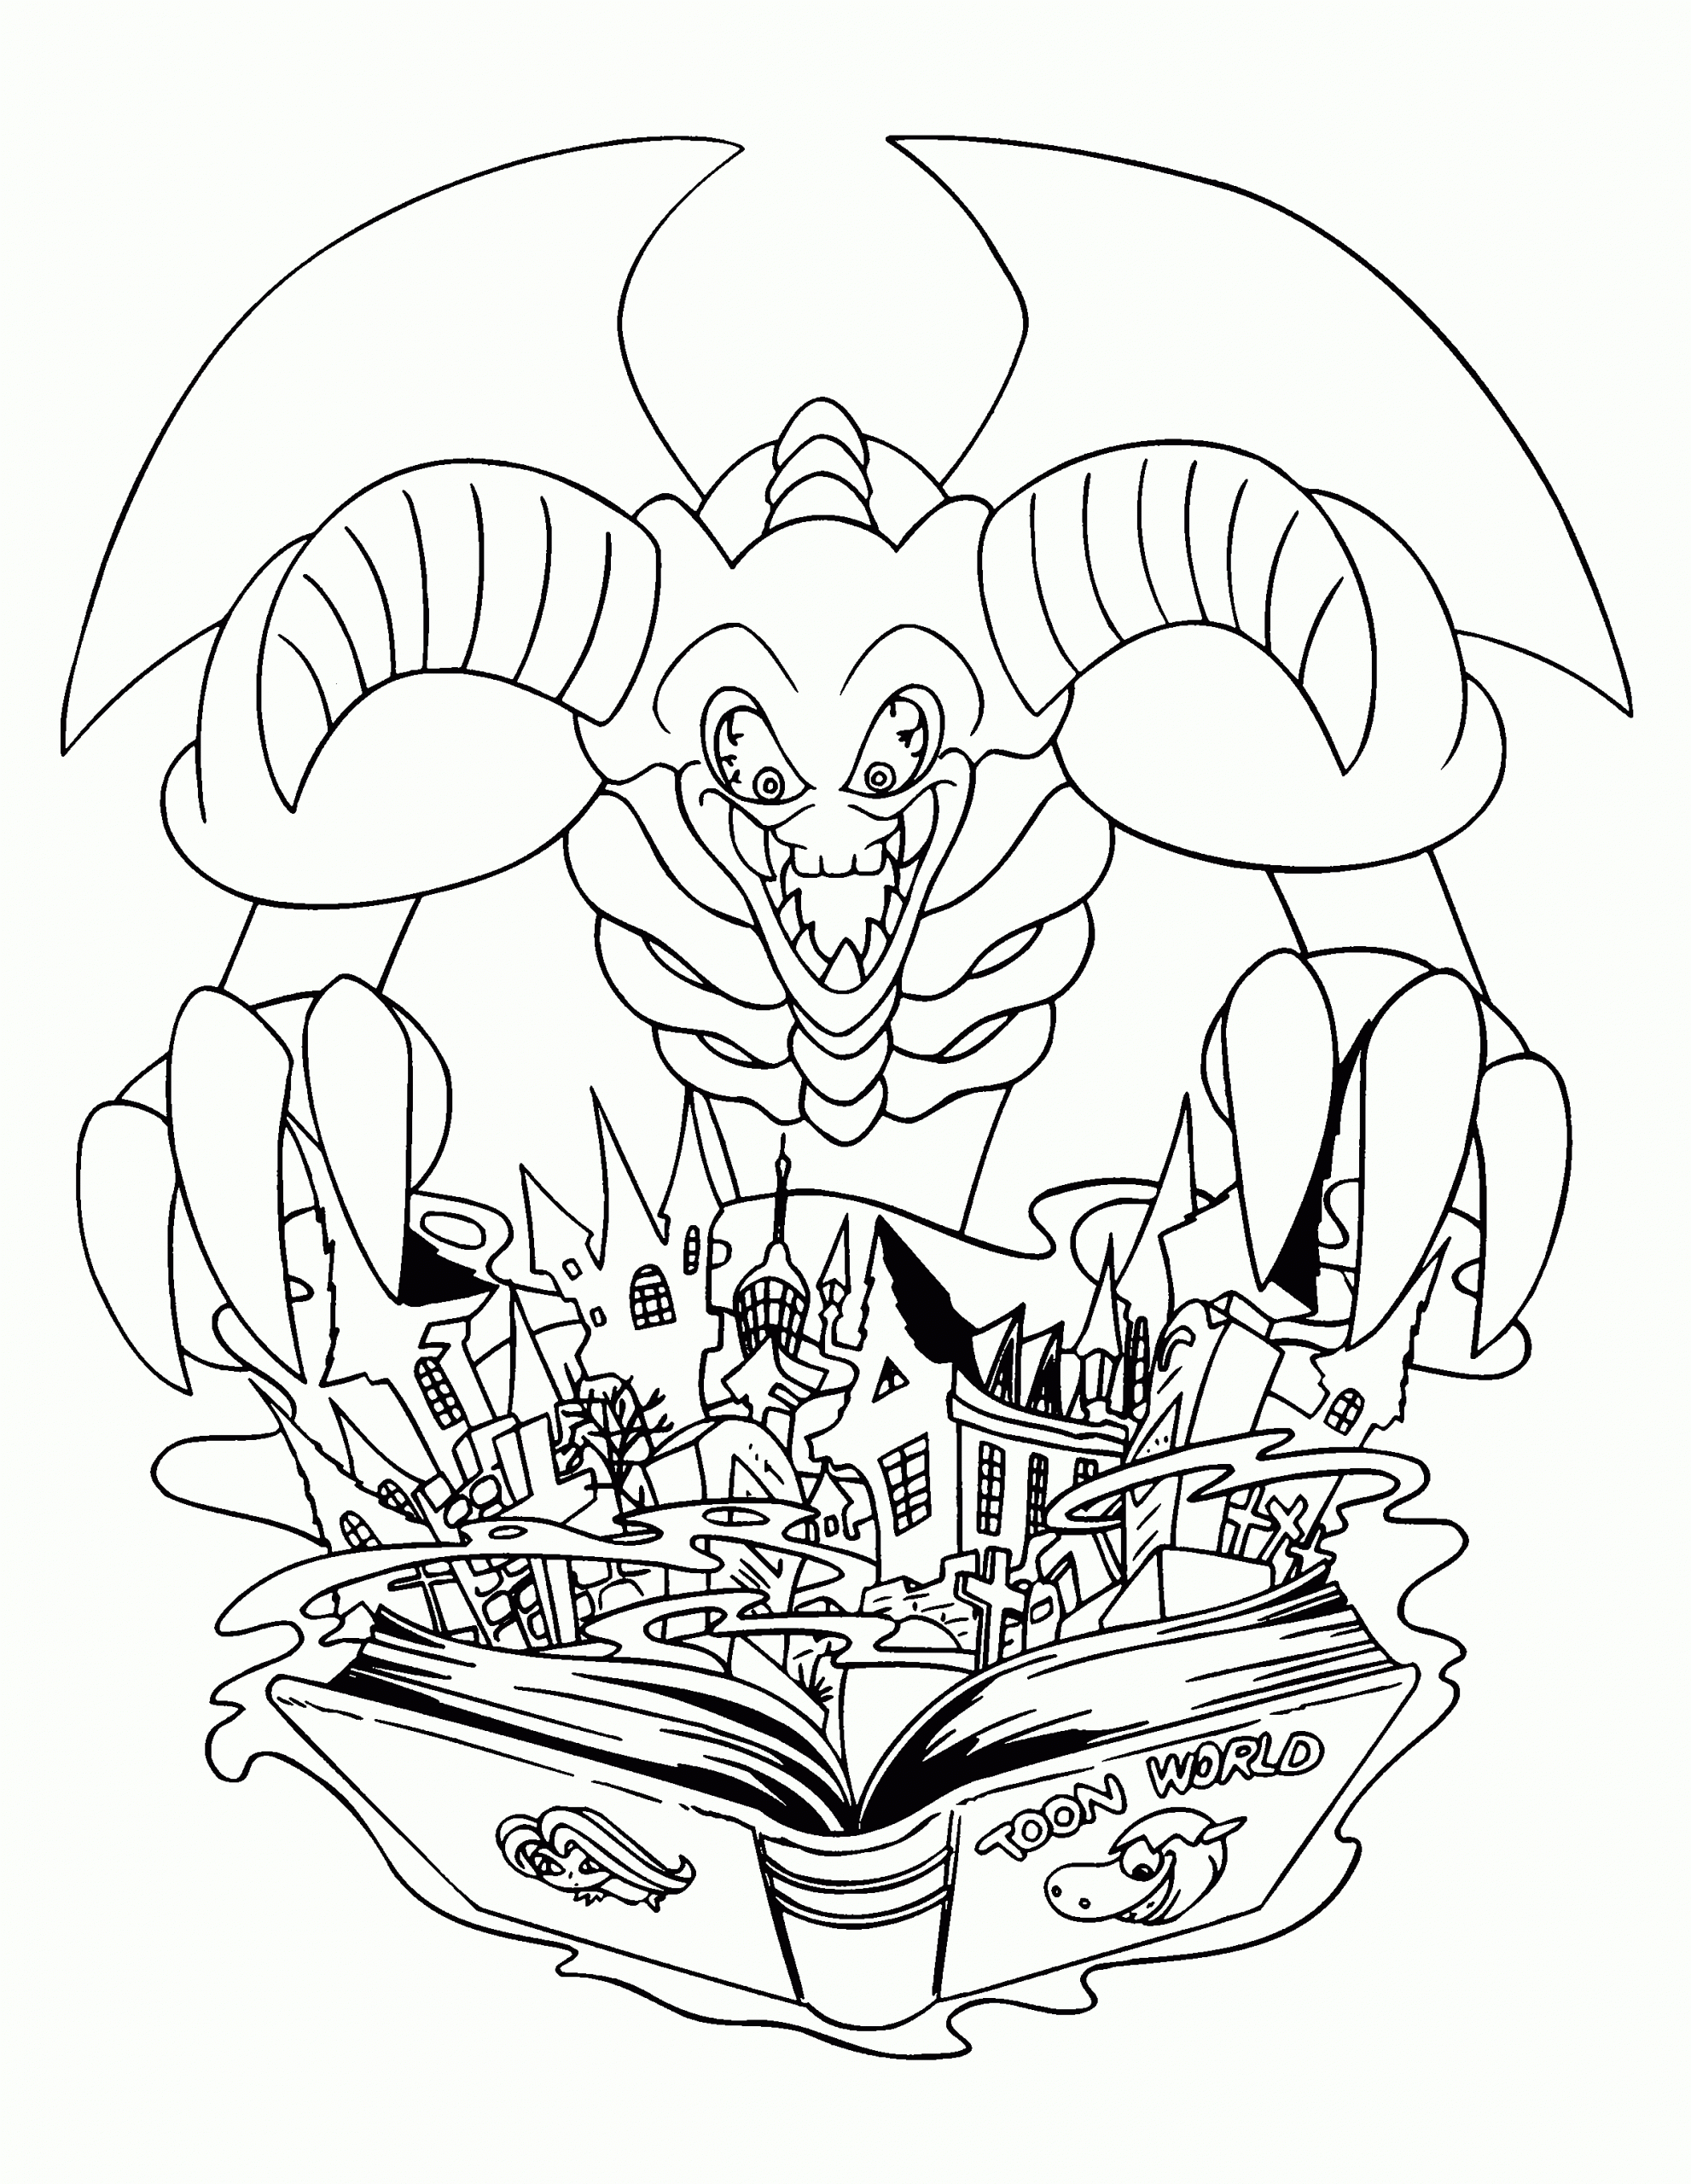 Coloring Pages Yu-Gi-Oh: Animated Images, Gifs, Pictures dedans Yu-Gi-Oh Coloring 50